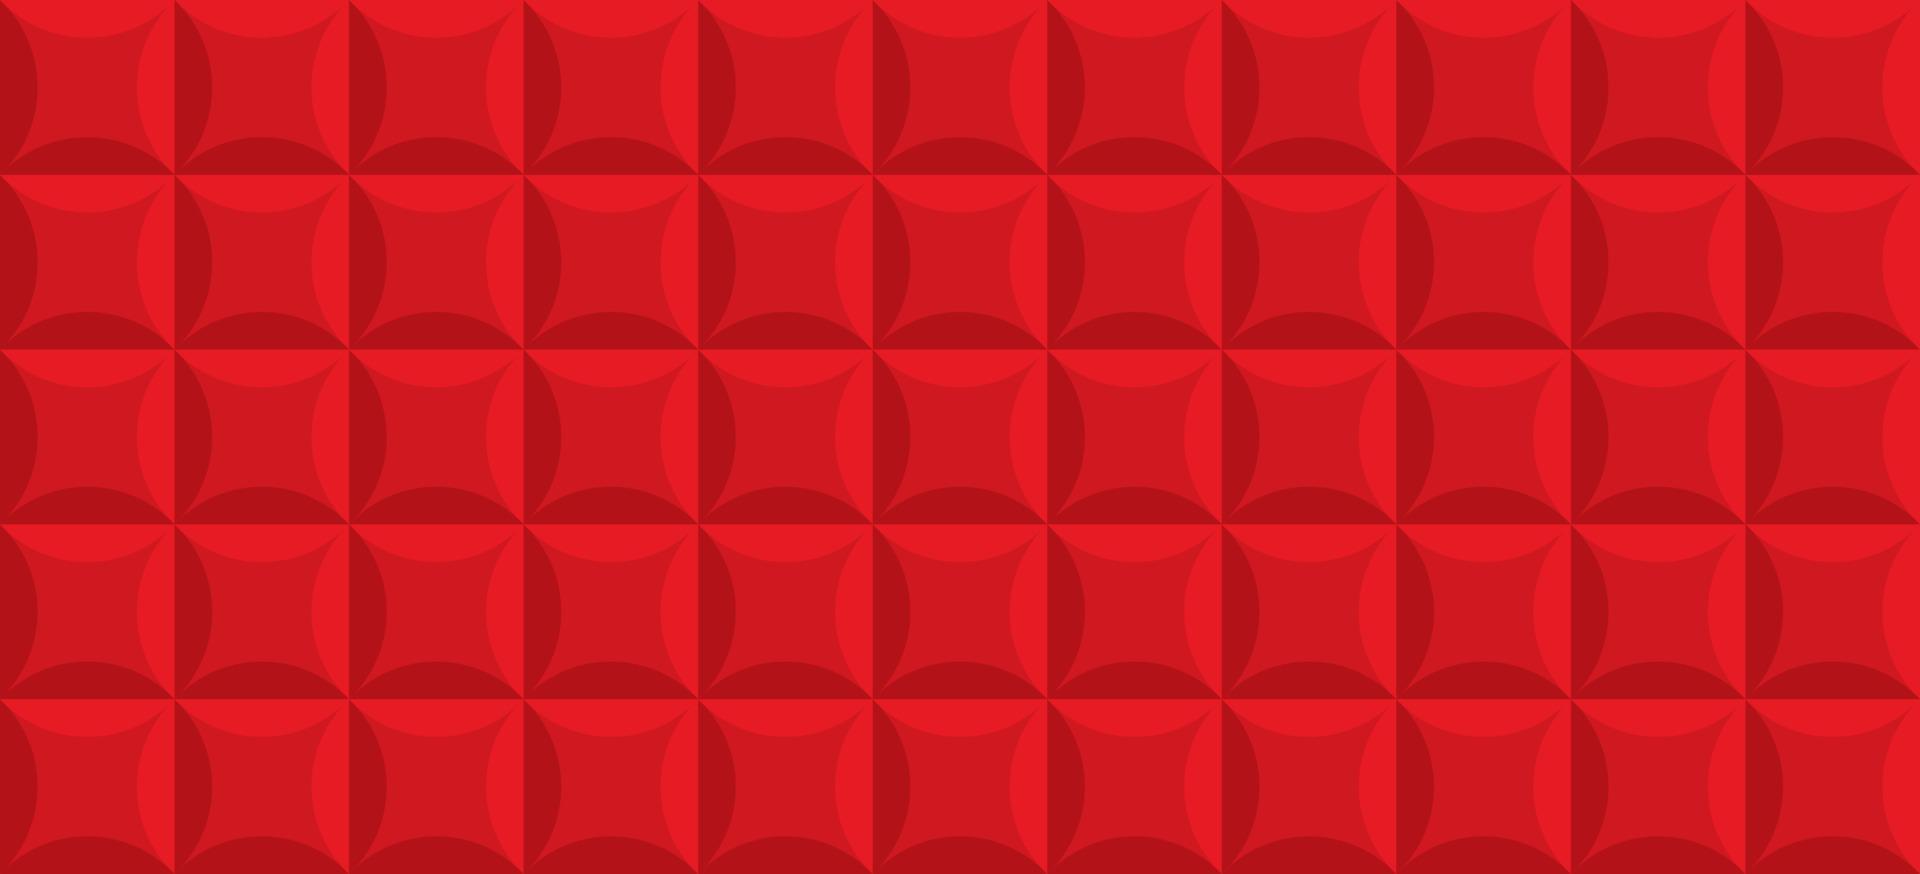 Realistic Red Tile Texture for Decor Interior with Square Shape. Geometric Surface Template. Luxury Leather Upholstery Vintage Background. Abstract Modern Wallpaper Design. Vector Illustration.